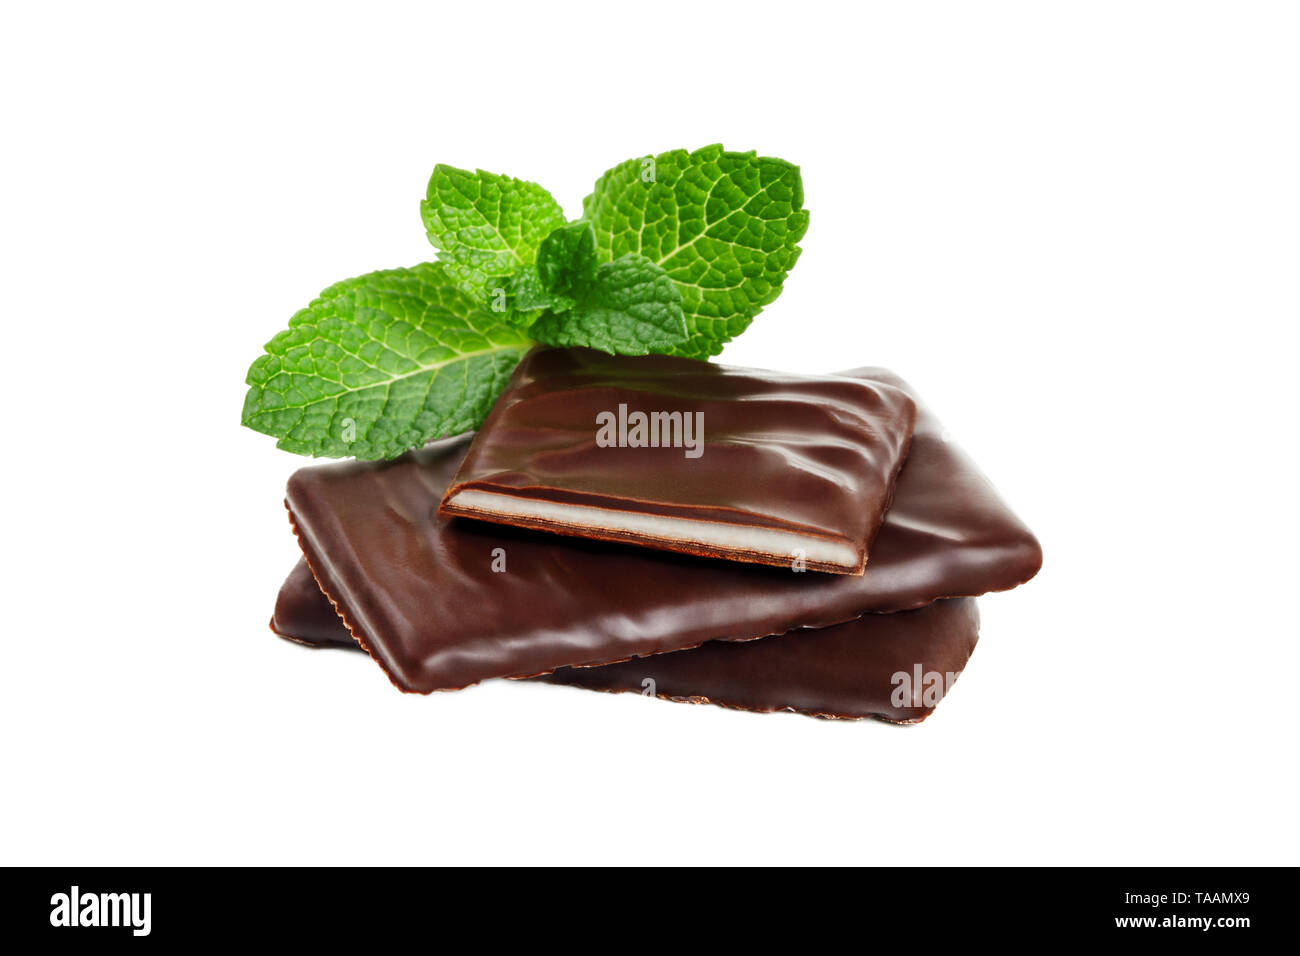 Peppermint chocolate bar with mint leaf isolated on white background Stock Photo